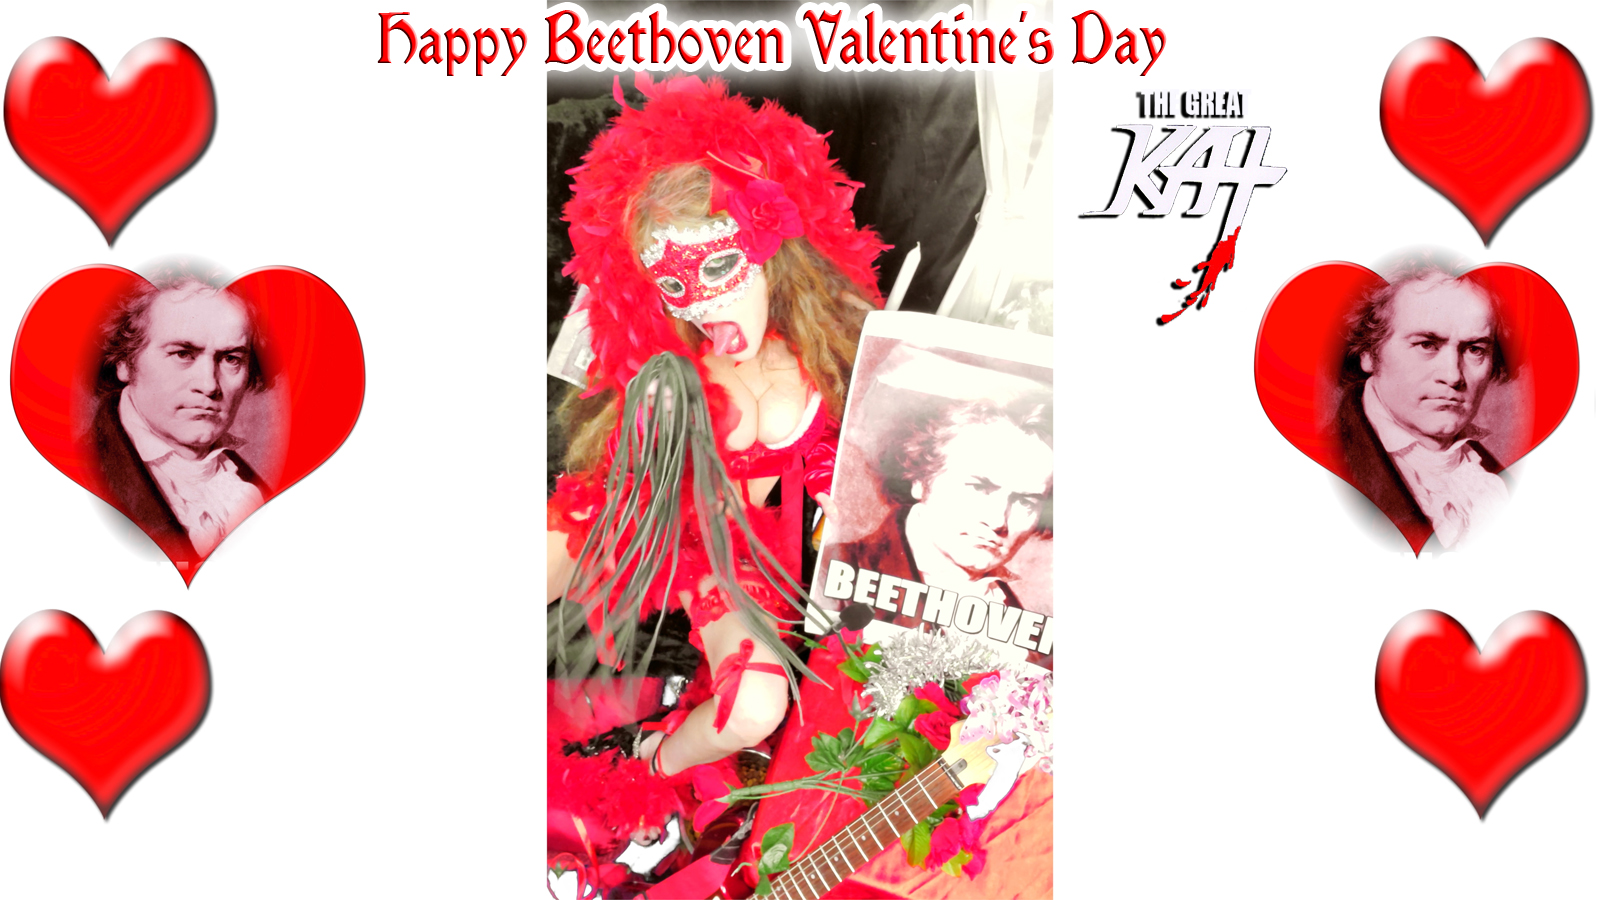 HAPPY BEETHOVEN VALENTINE'S DAY! From NEW BEETHOVEN RECORDING AND MUSIC VIDEO! CELEBRATE BEETHOVEN'S 250TH BIRTHDAY-DEC 16, 2020-with THE GREAT KAT REINCARNATION of BEETHOVEN! 